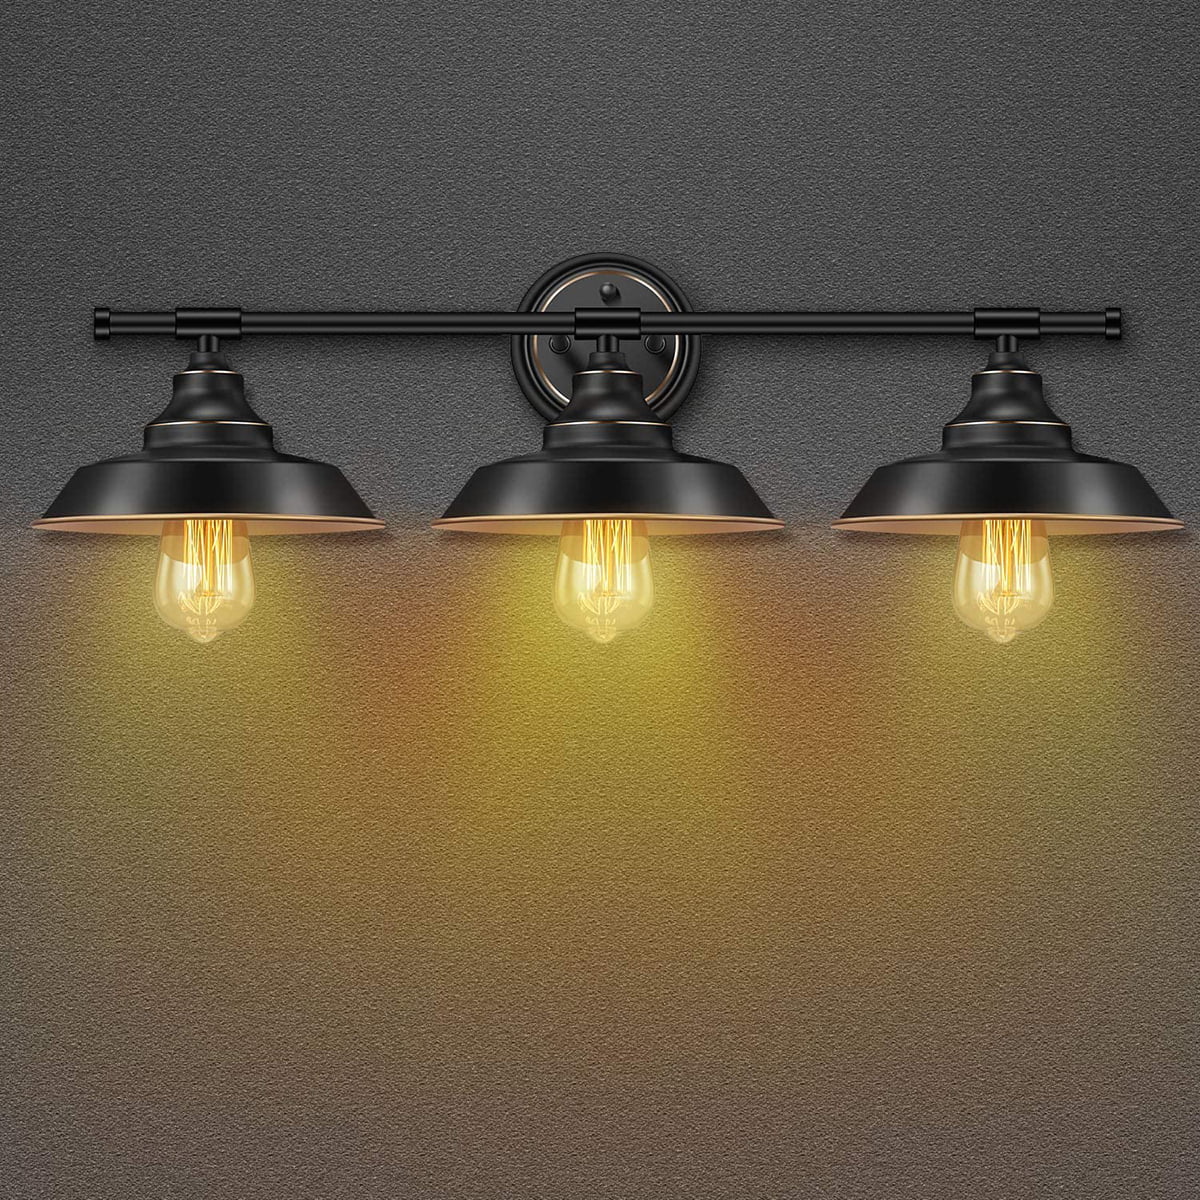 Vanity Light Fixtures Industrial Wall Mount Light Sconces Black with Highlight 